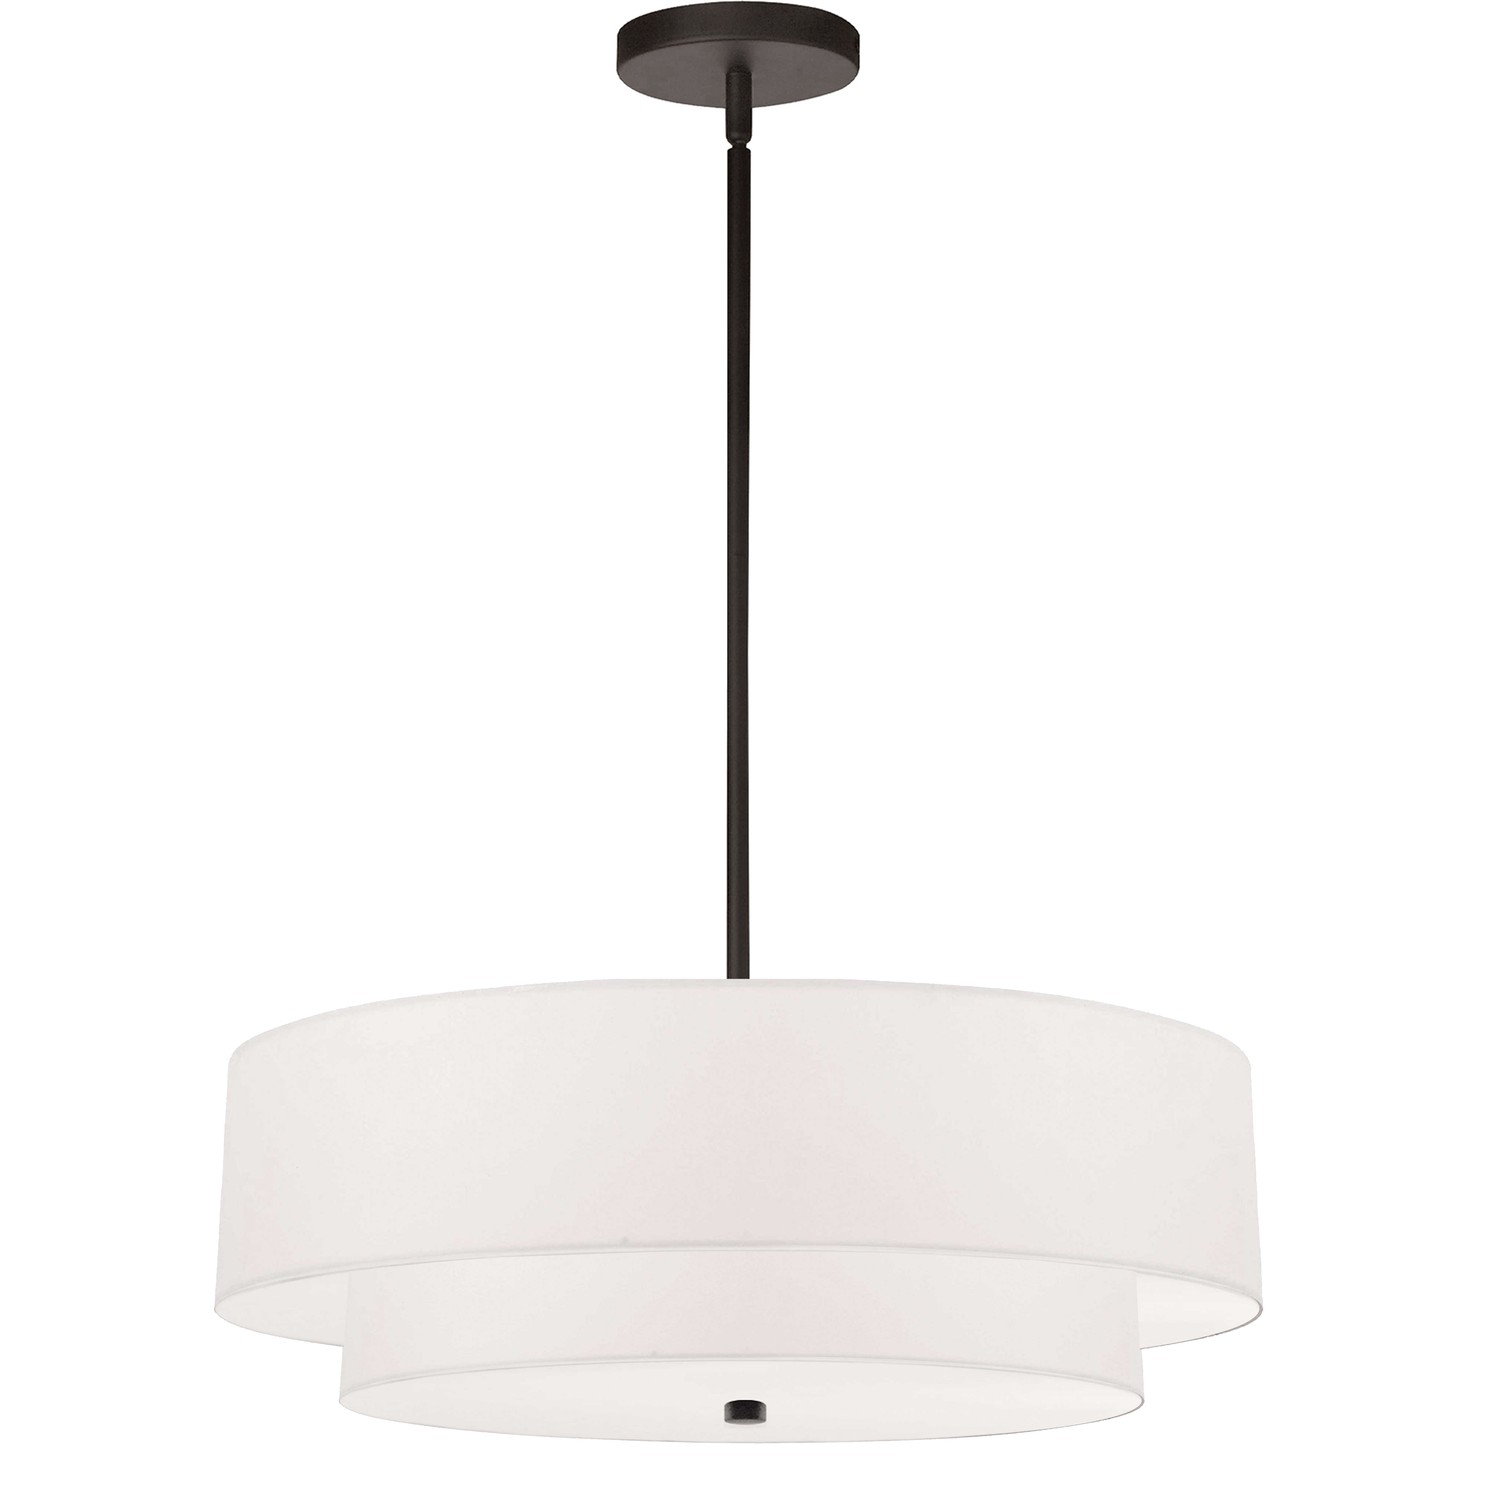 4 Light Incandescent 2 Tier Pendant, Matte Black with White Shade